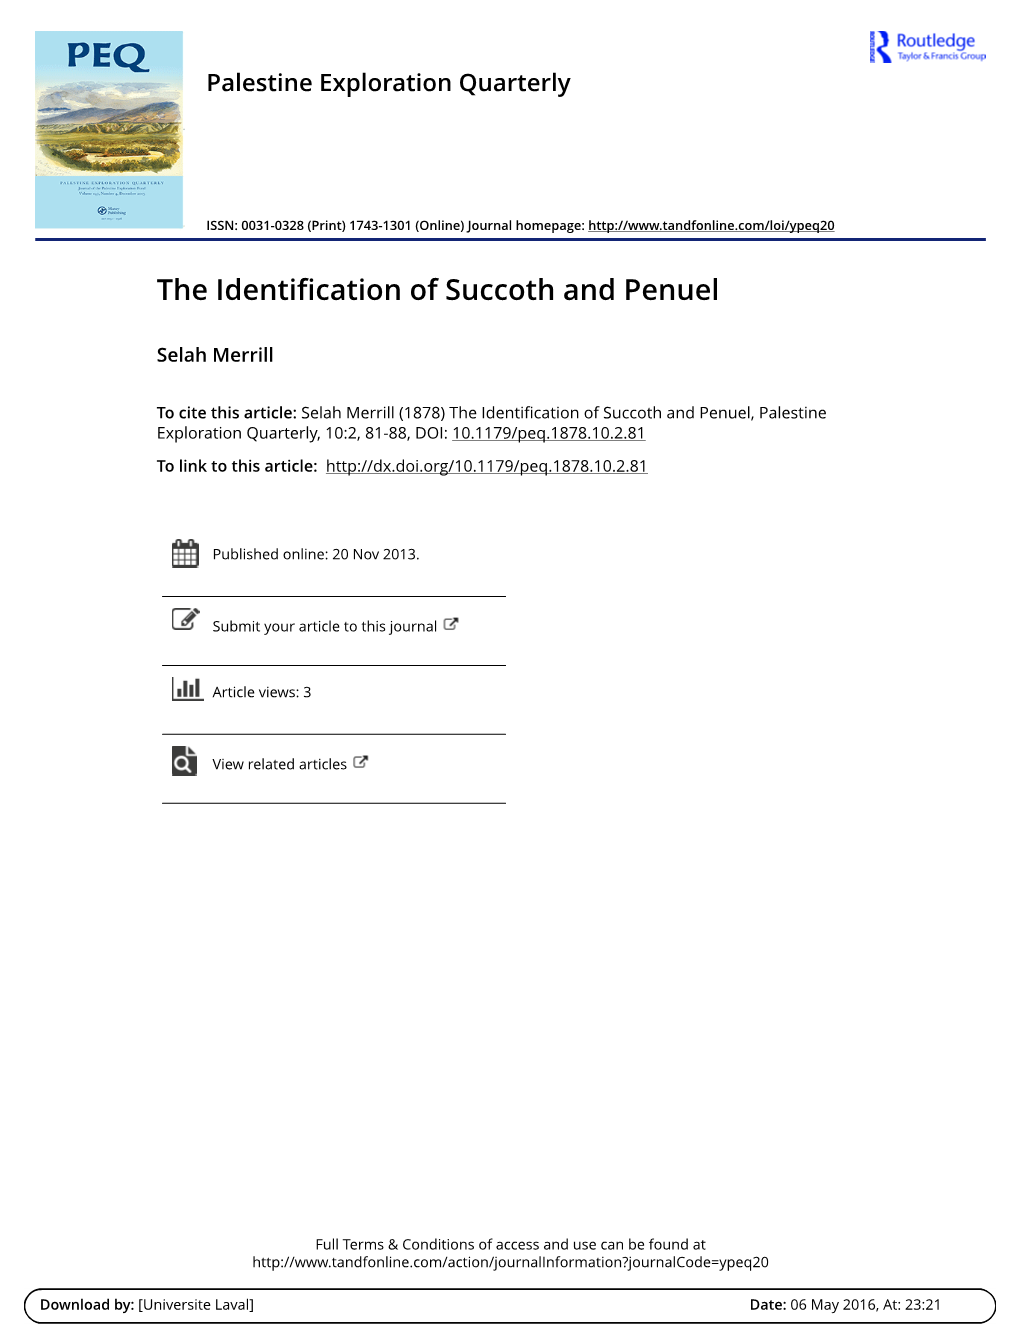 The Identification of Succoth and Penuel